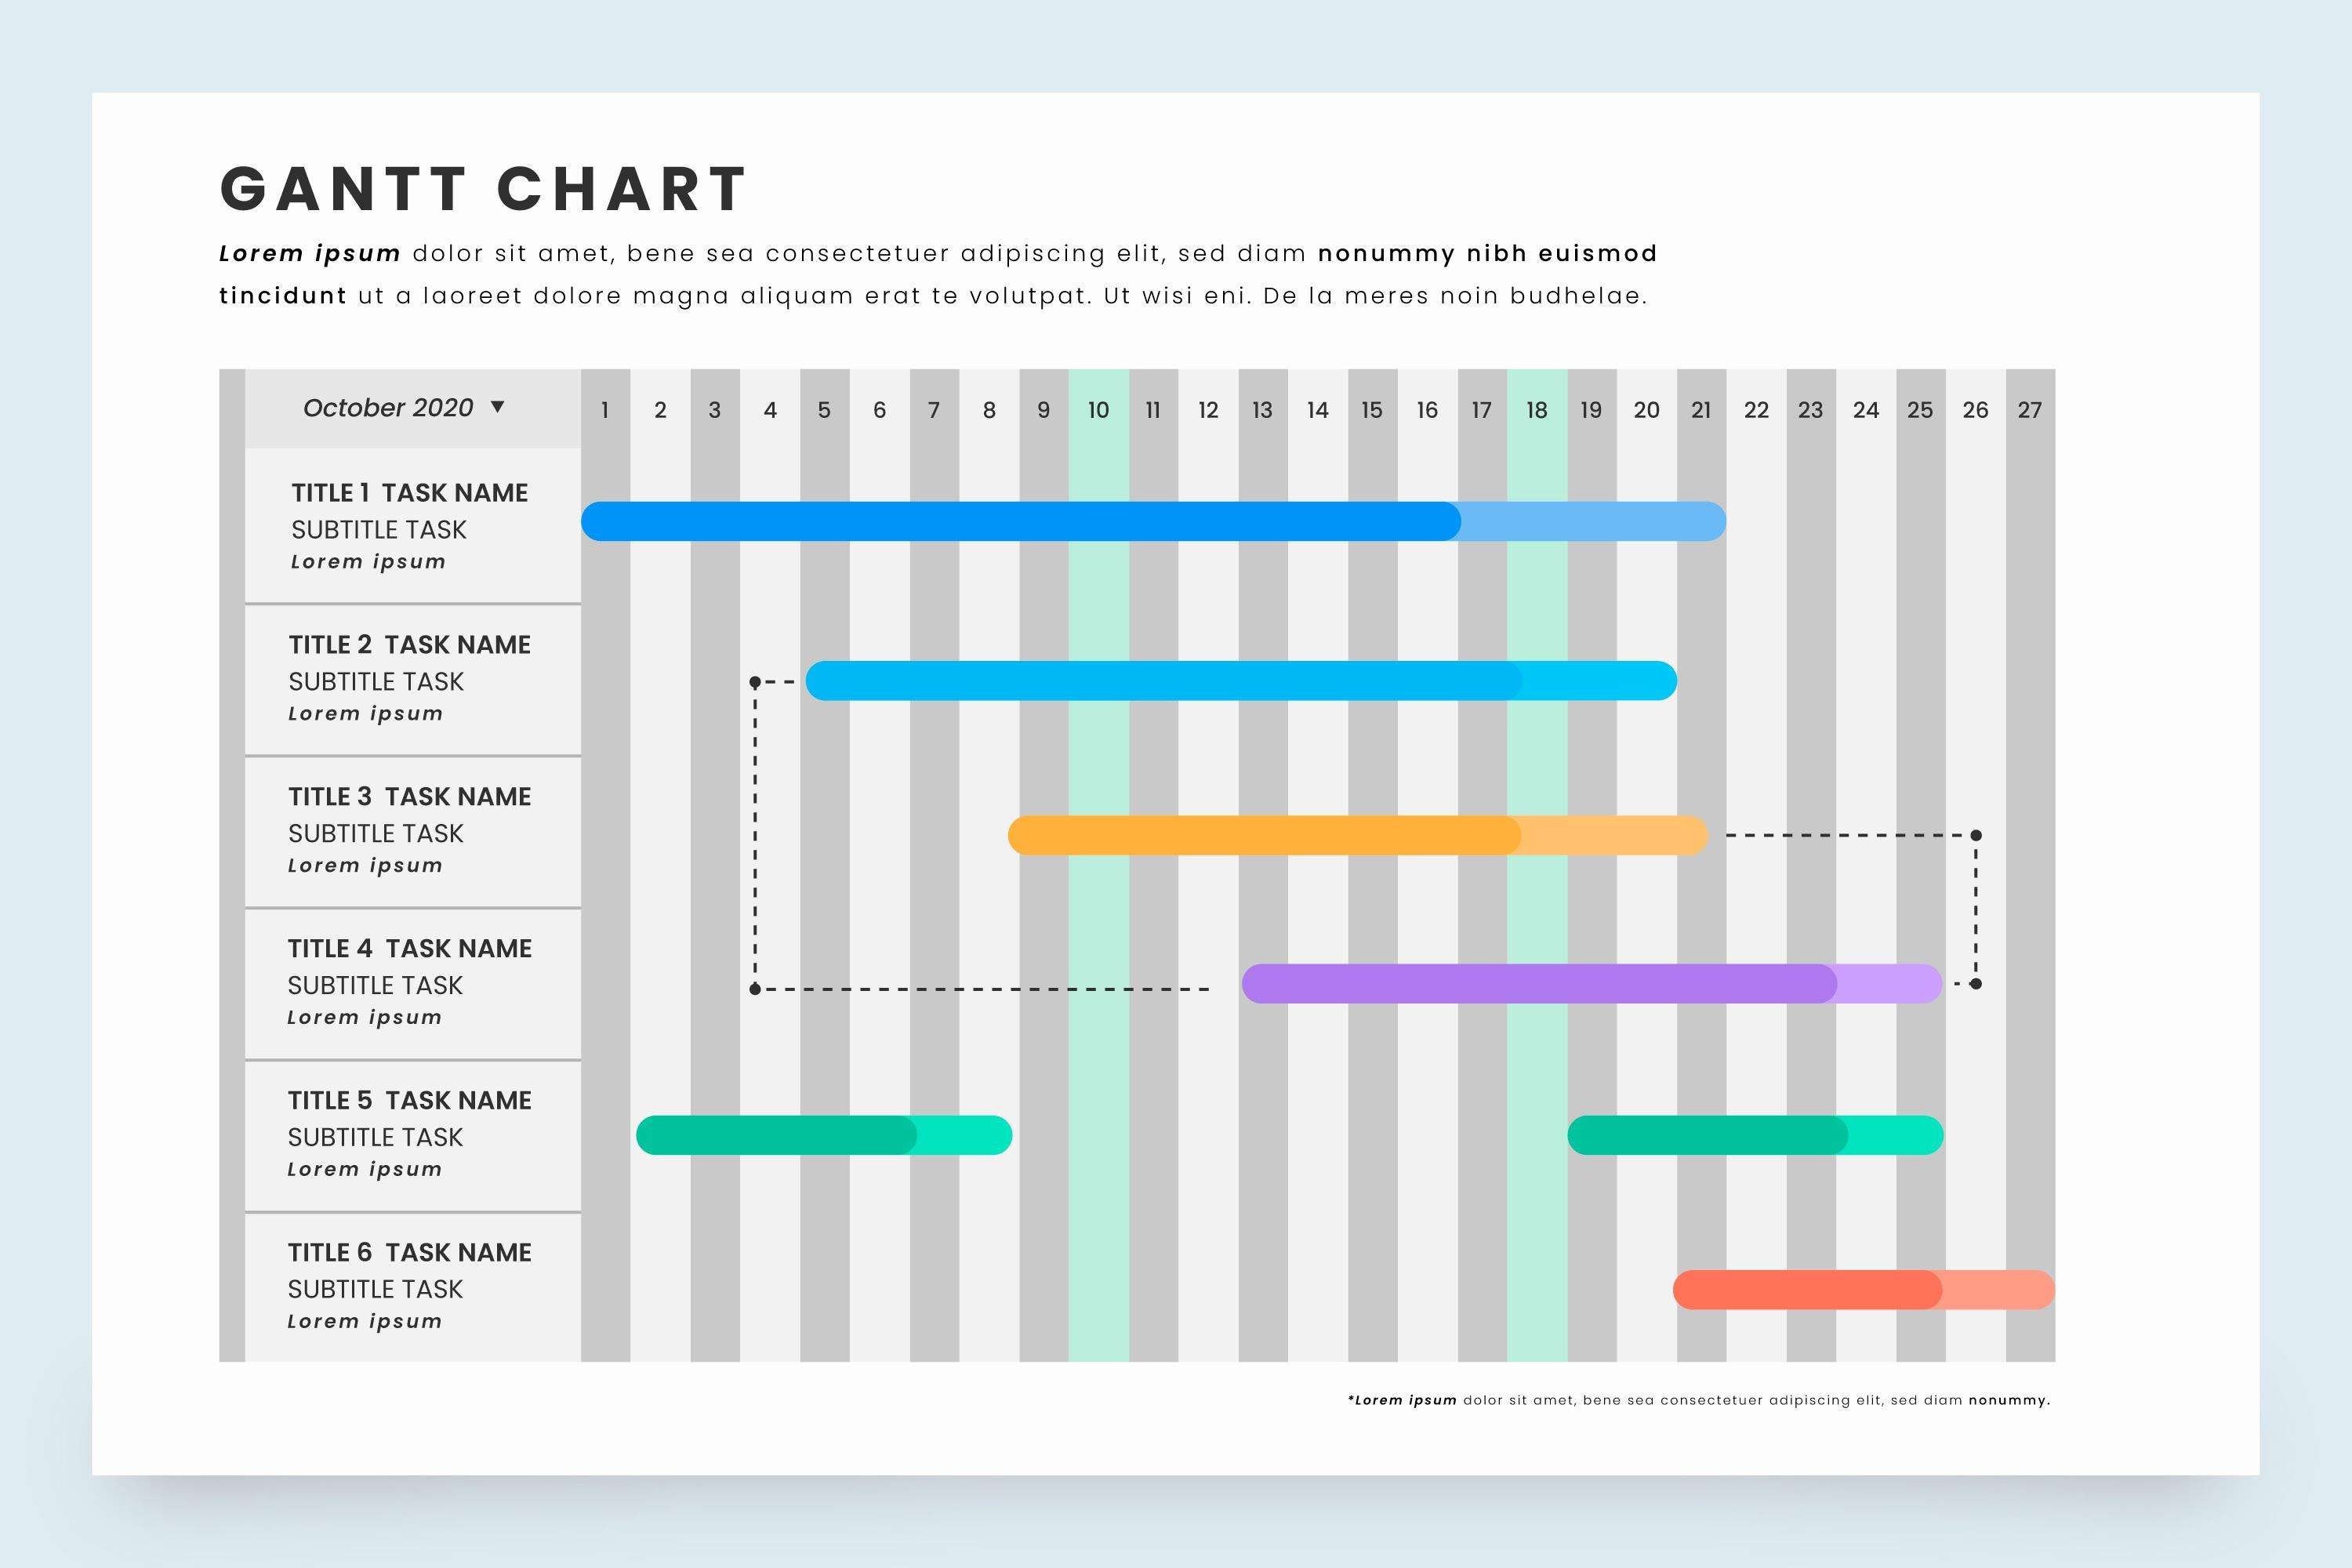 A sample of a Gantt chart showing activities and timelines in different colors.